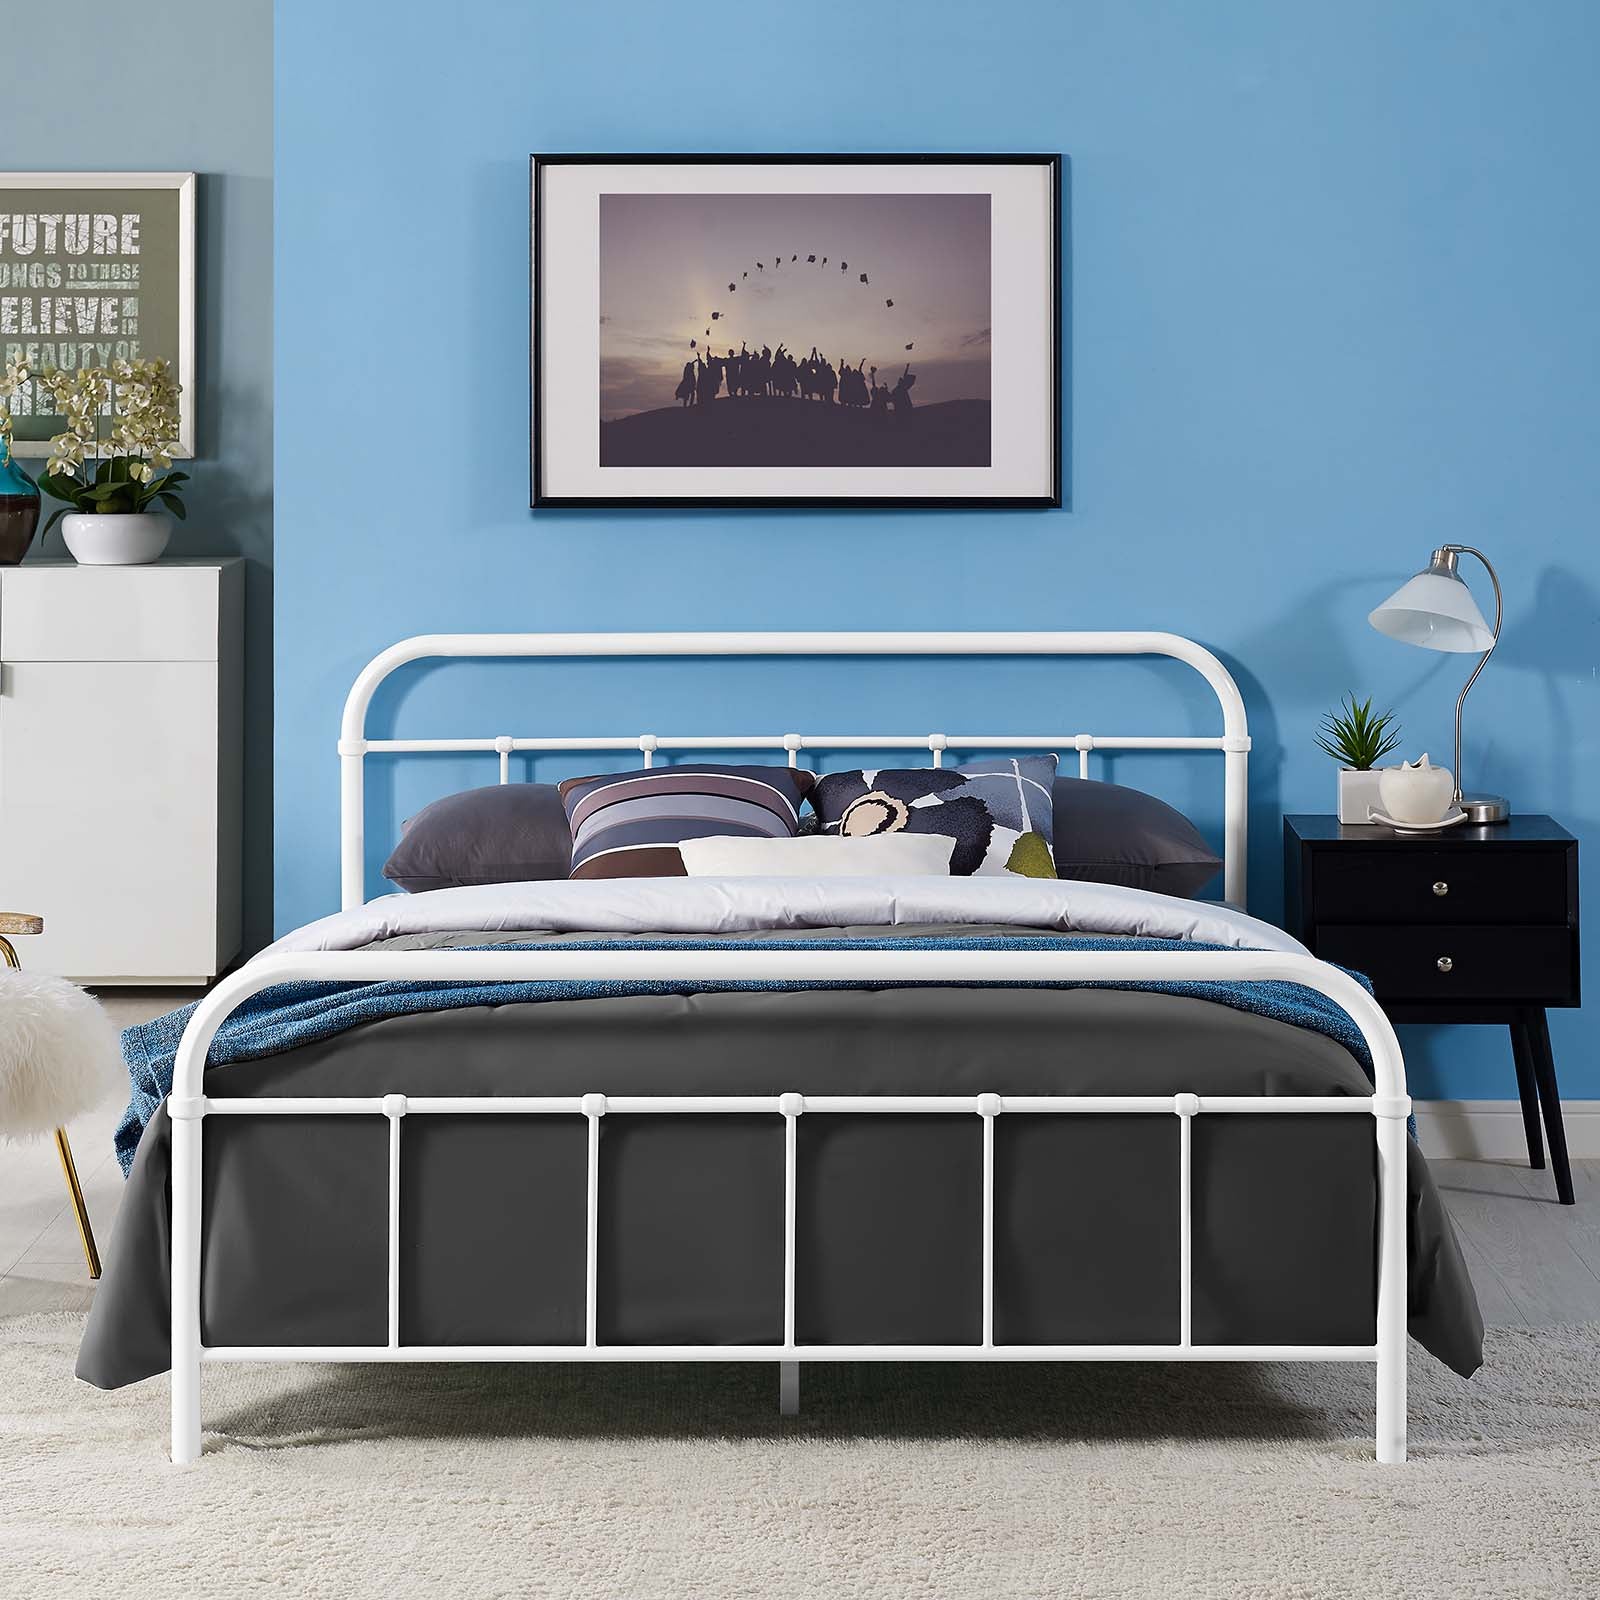 Modway Beds - Maisie Queen Stainless Steel Bed Frame White